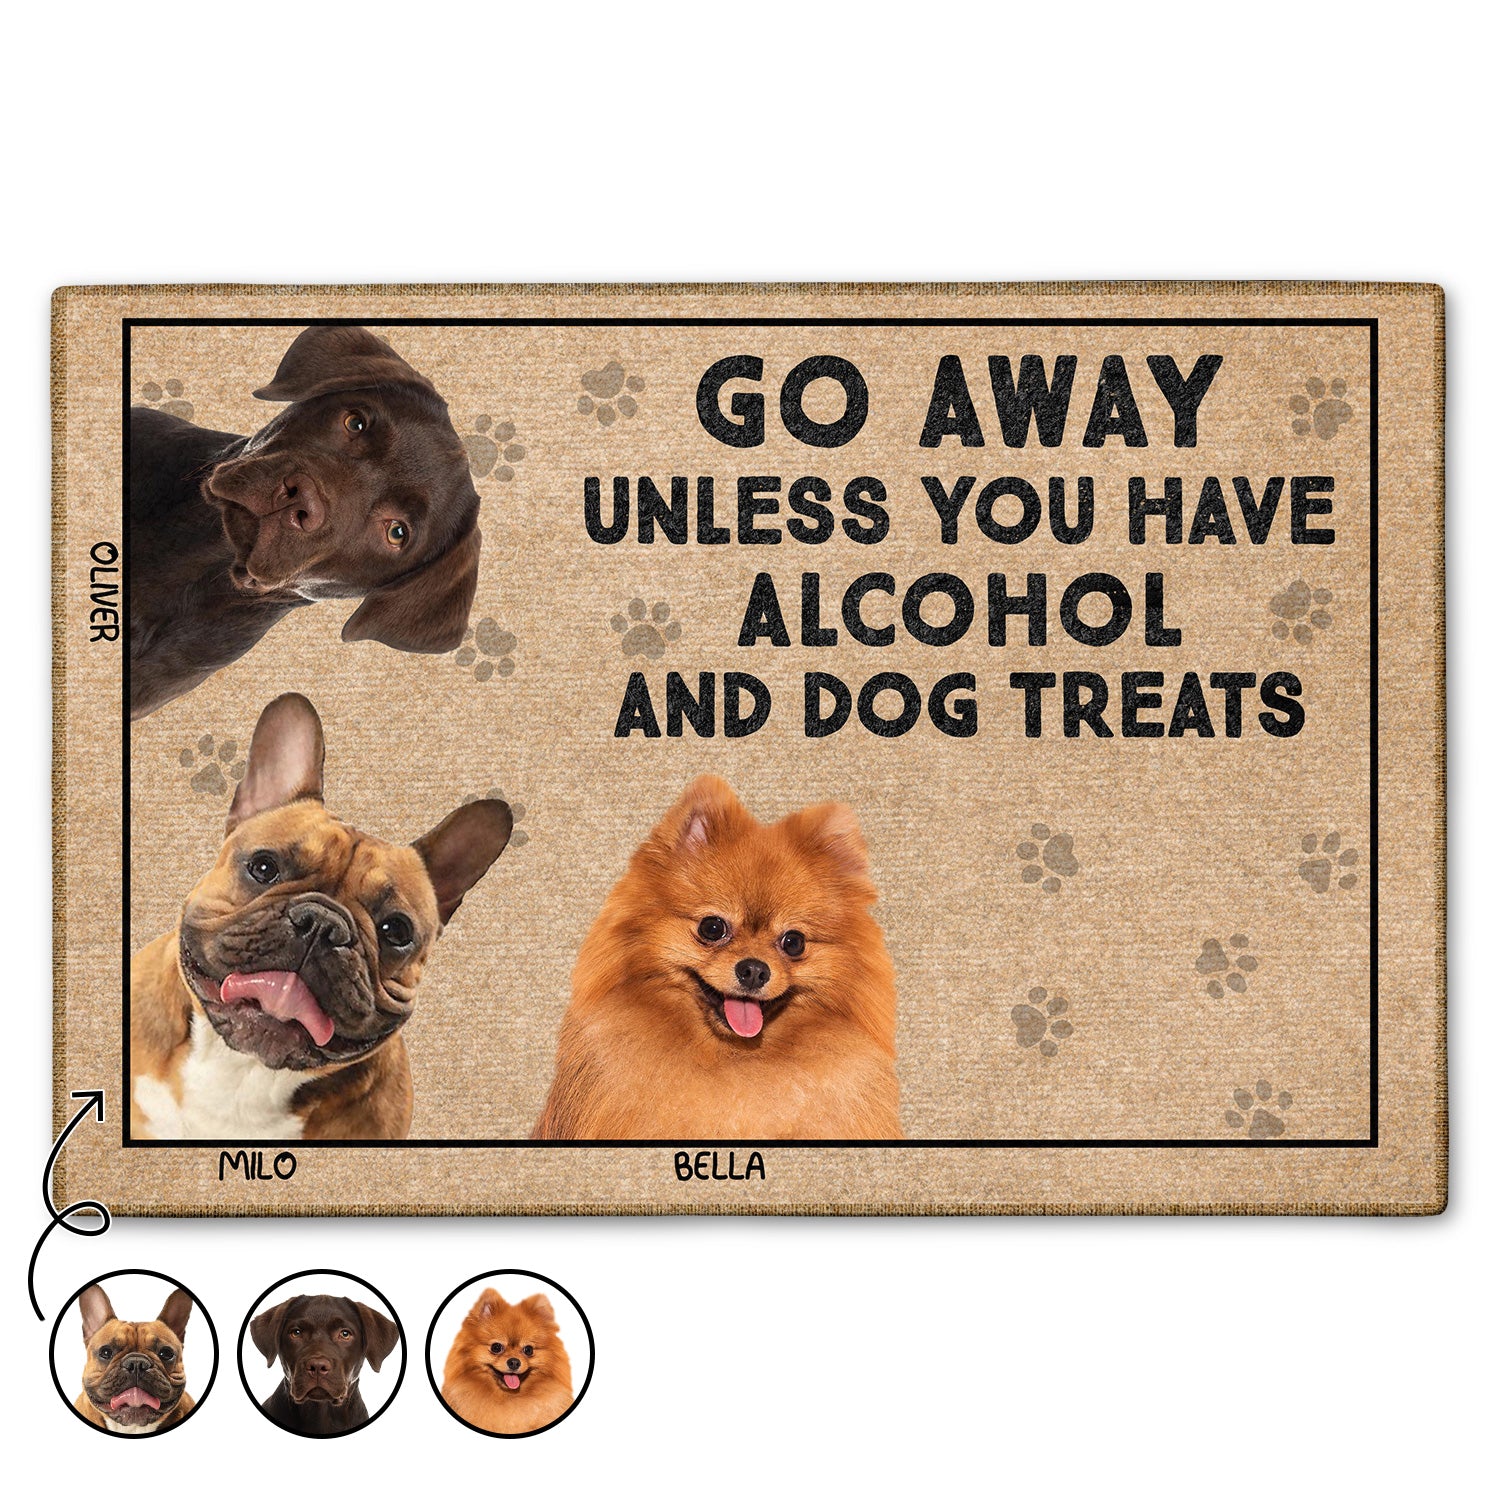 Custom Photo Go Away Unless You Have Alcohol And Dog Treats Cat Treats Pet Treats - Gift For Cat Lovers, Dog Lovers - Personalized Doormat